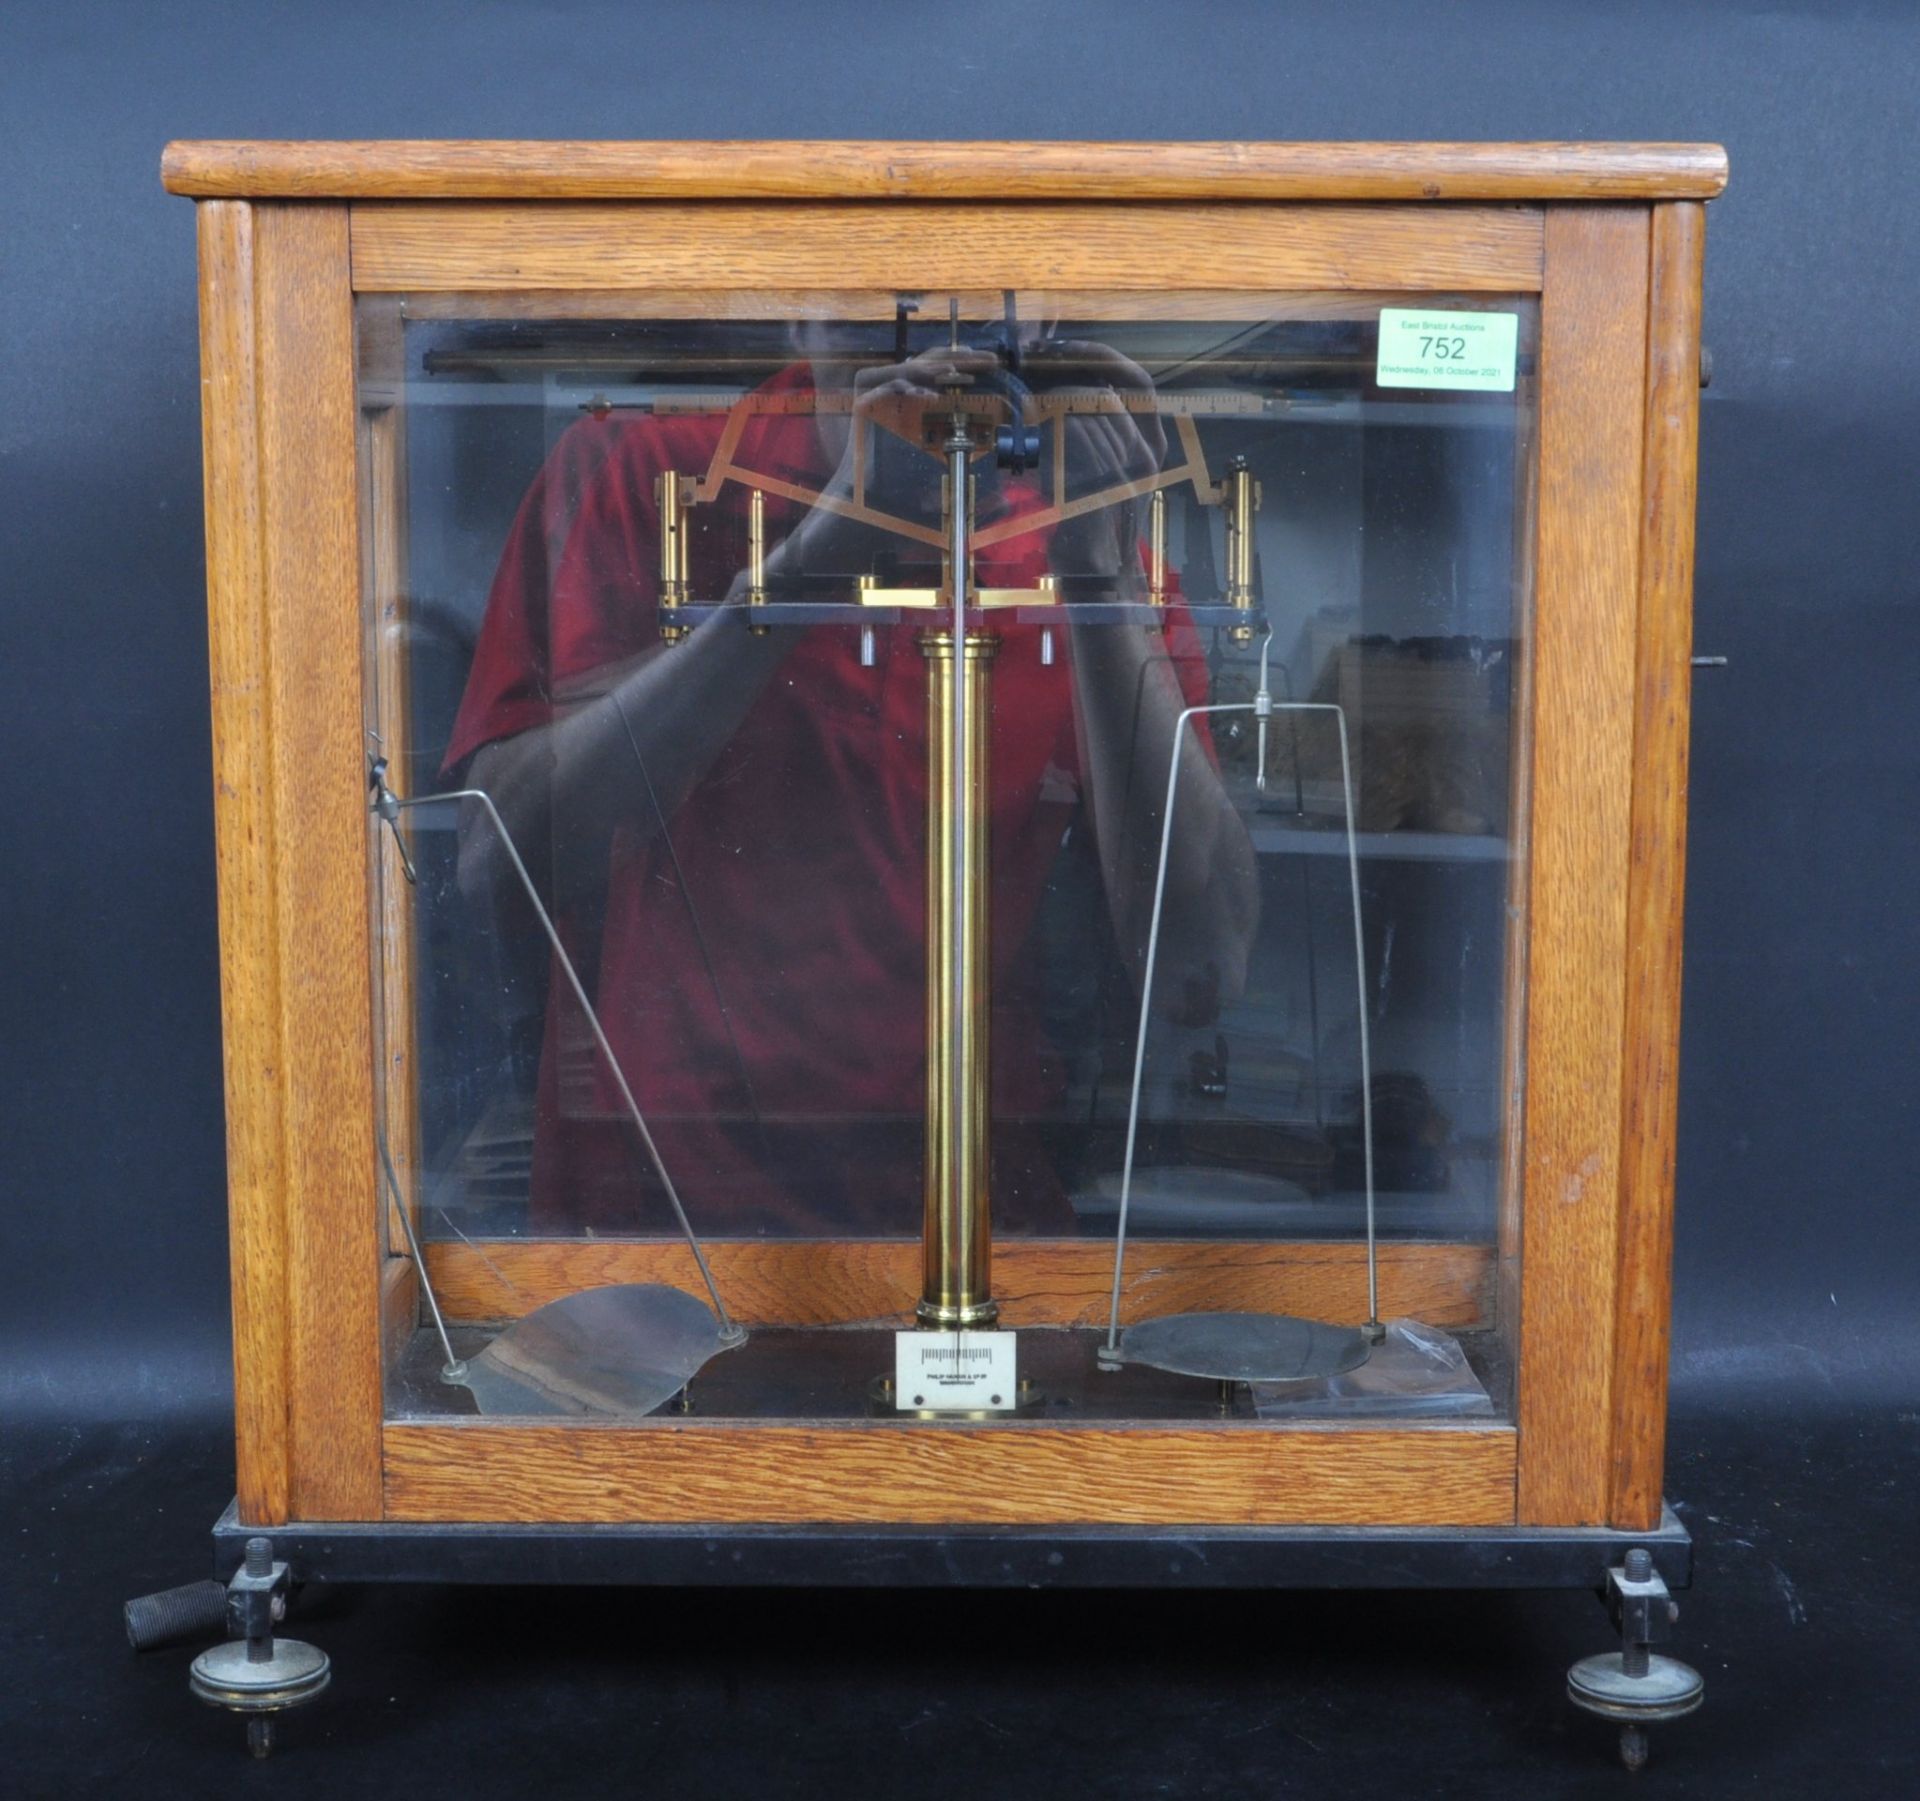 EARLY 20TH CENTURY LABORATORY BALANCE SCALES BY PHILIP HARRIS AND CO LTD